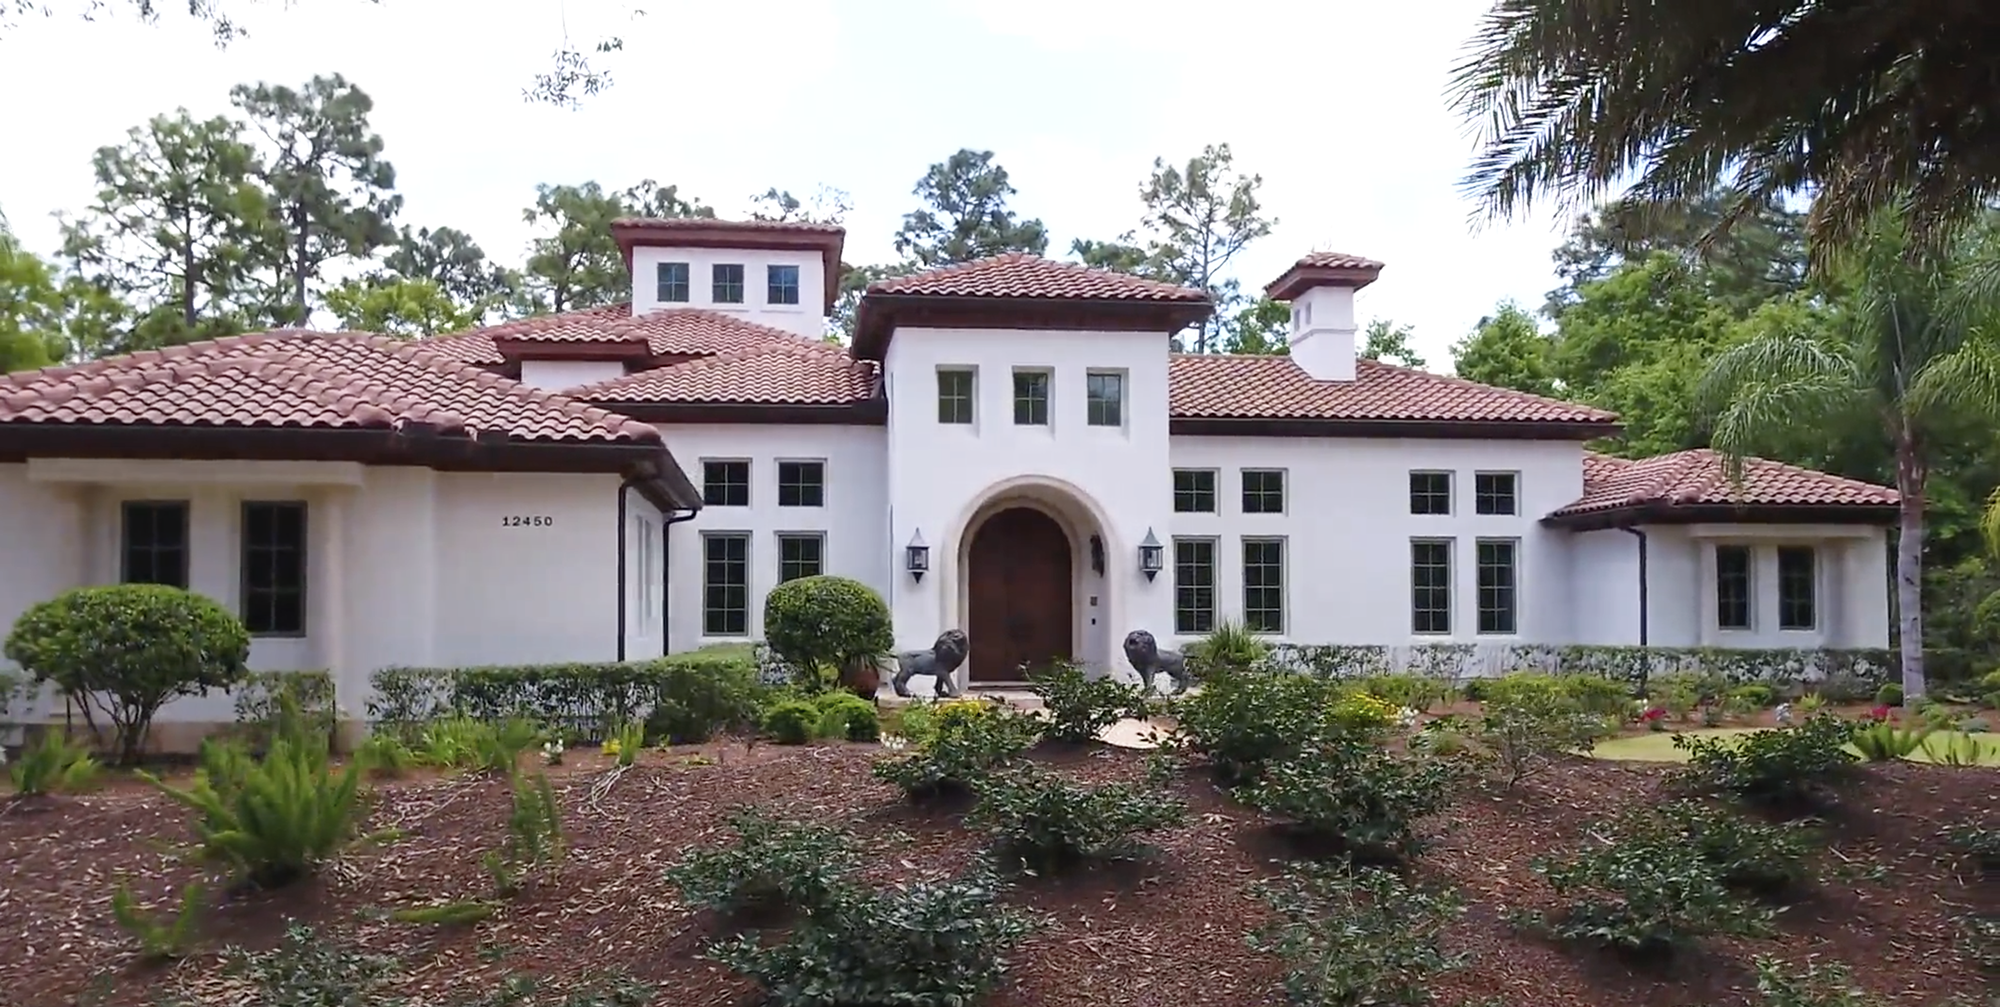 The two-story home was once owned by former Jaguars quarterback David Garrard.